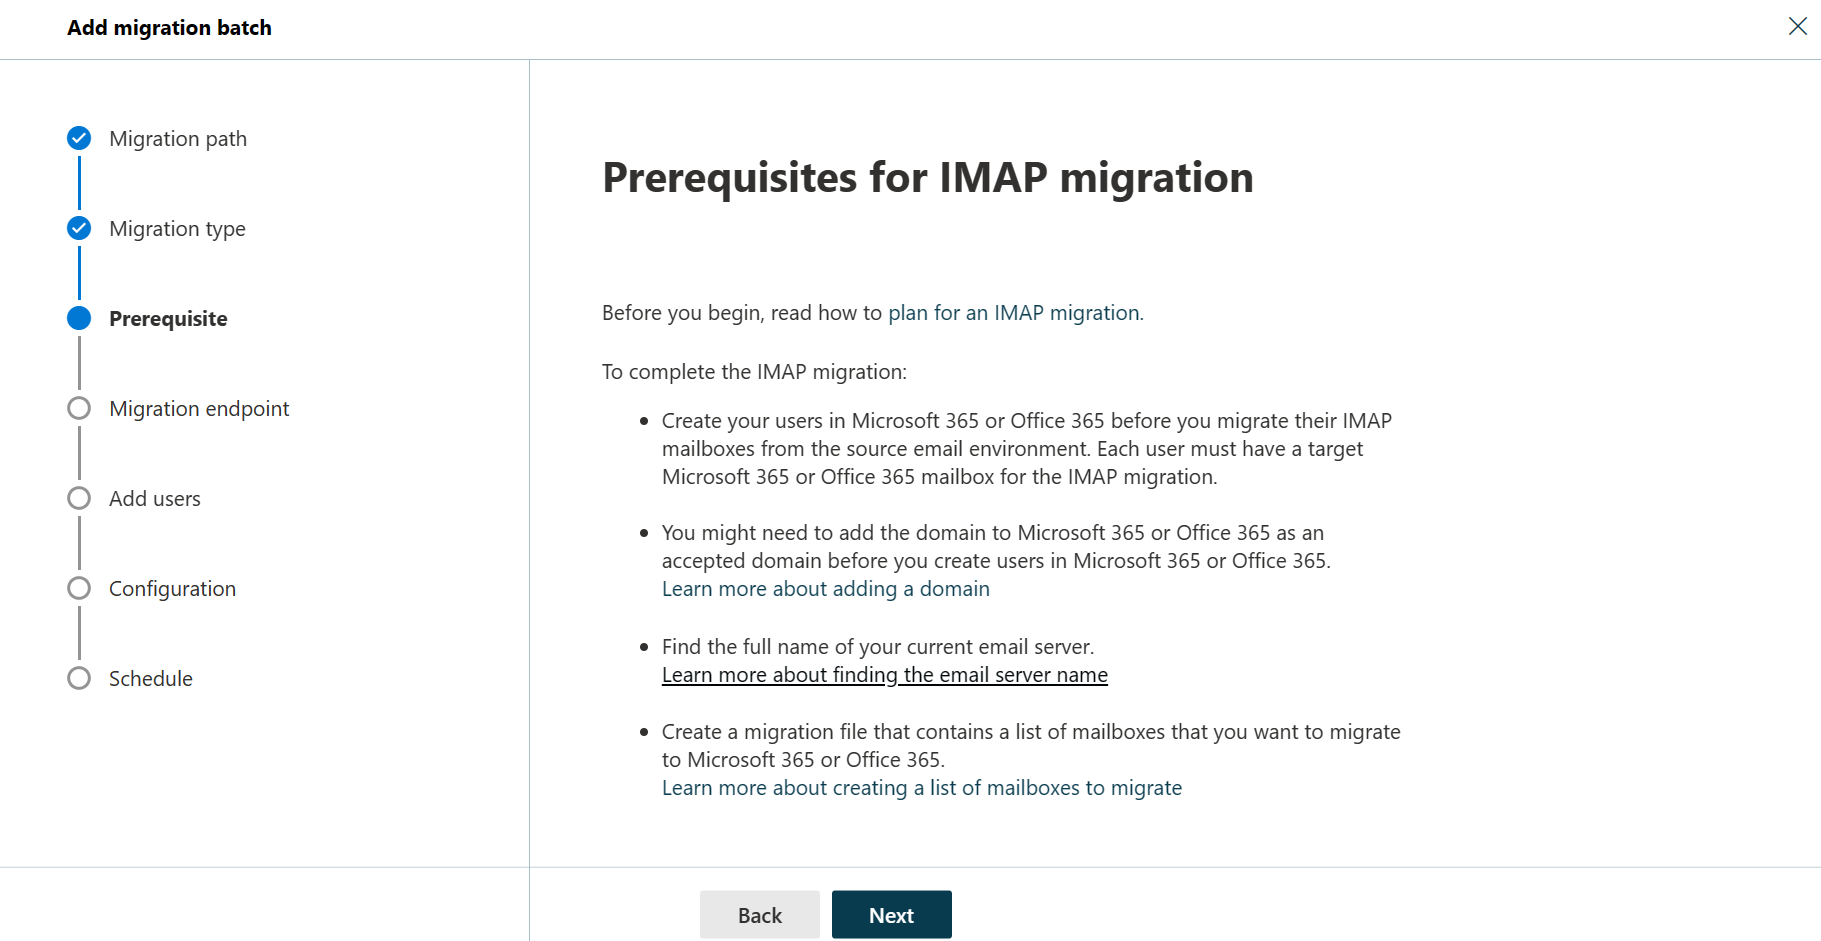 Screenshot of the third step of migration batch wizard listing the prerequisites for an IMAP migration.